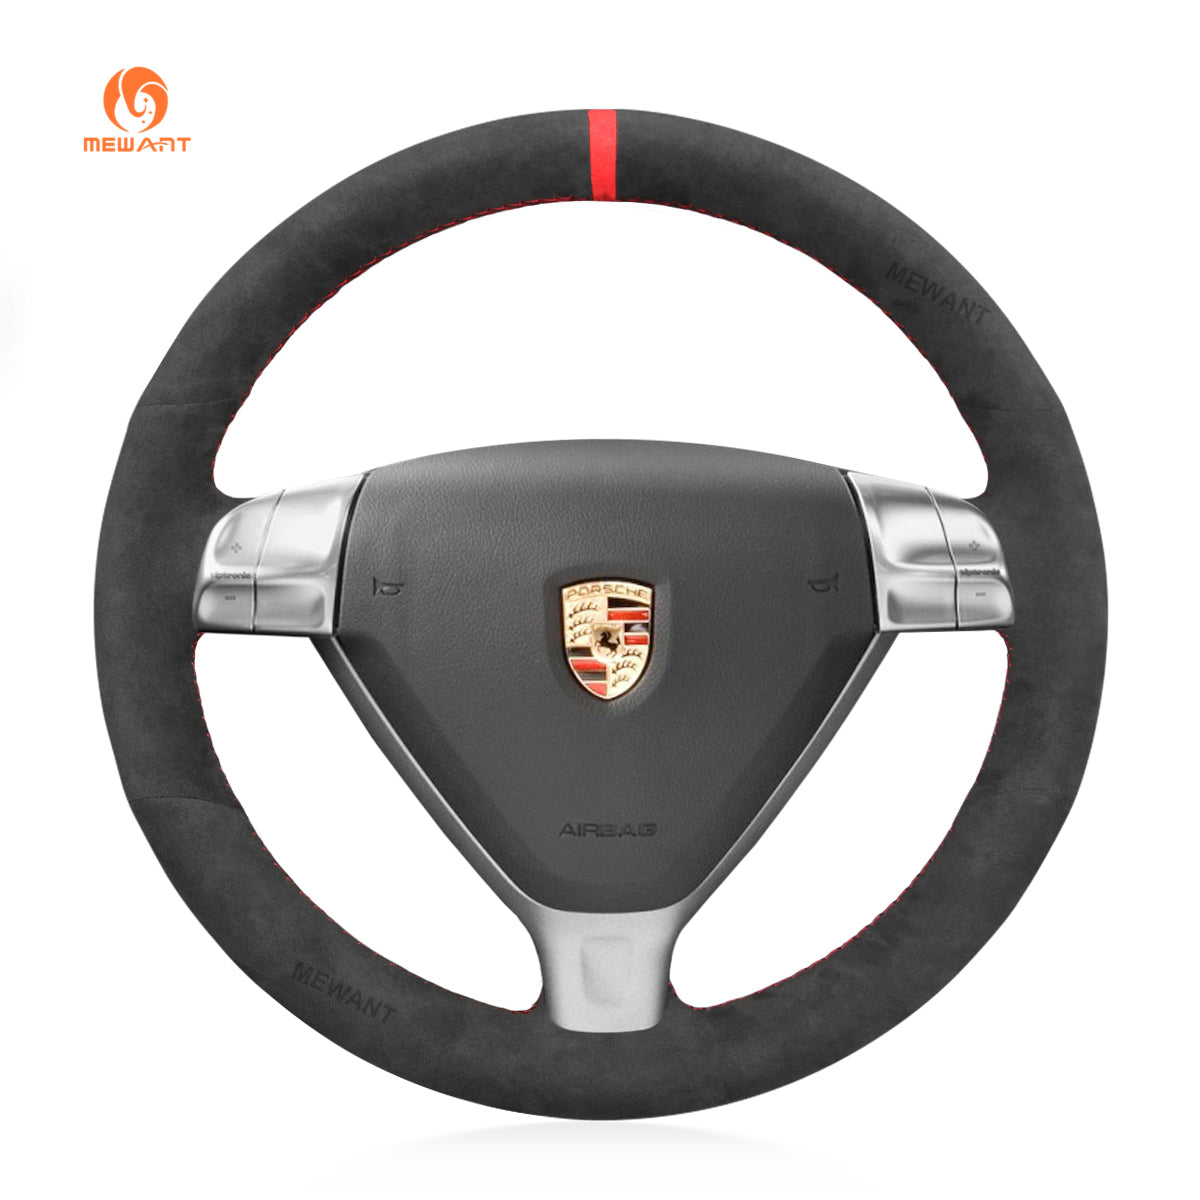 MEWANT DIY Car Steering Wheel Cover for Porsche 911 (997) 2005-2009 / Boxster (987) 2005-2009 / Cayman (987) 2006-2009